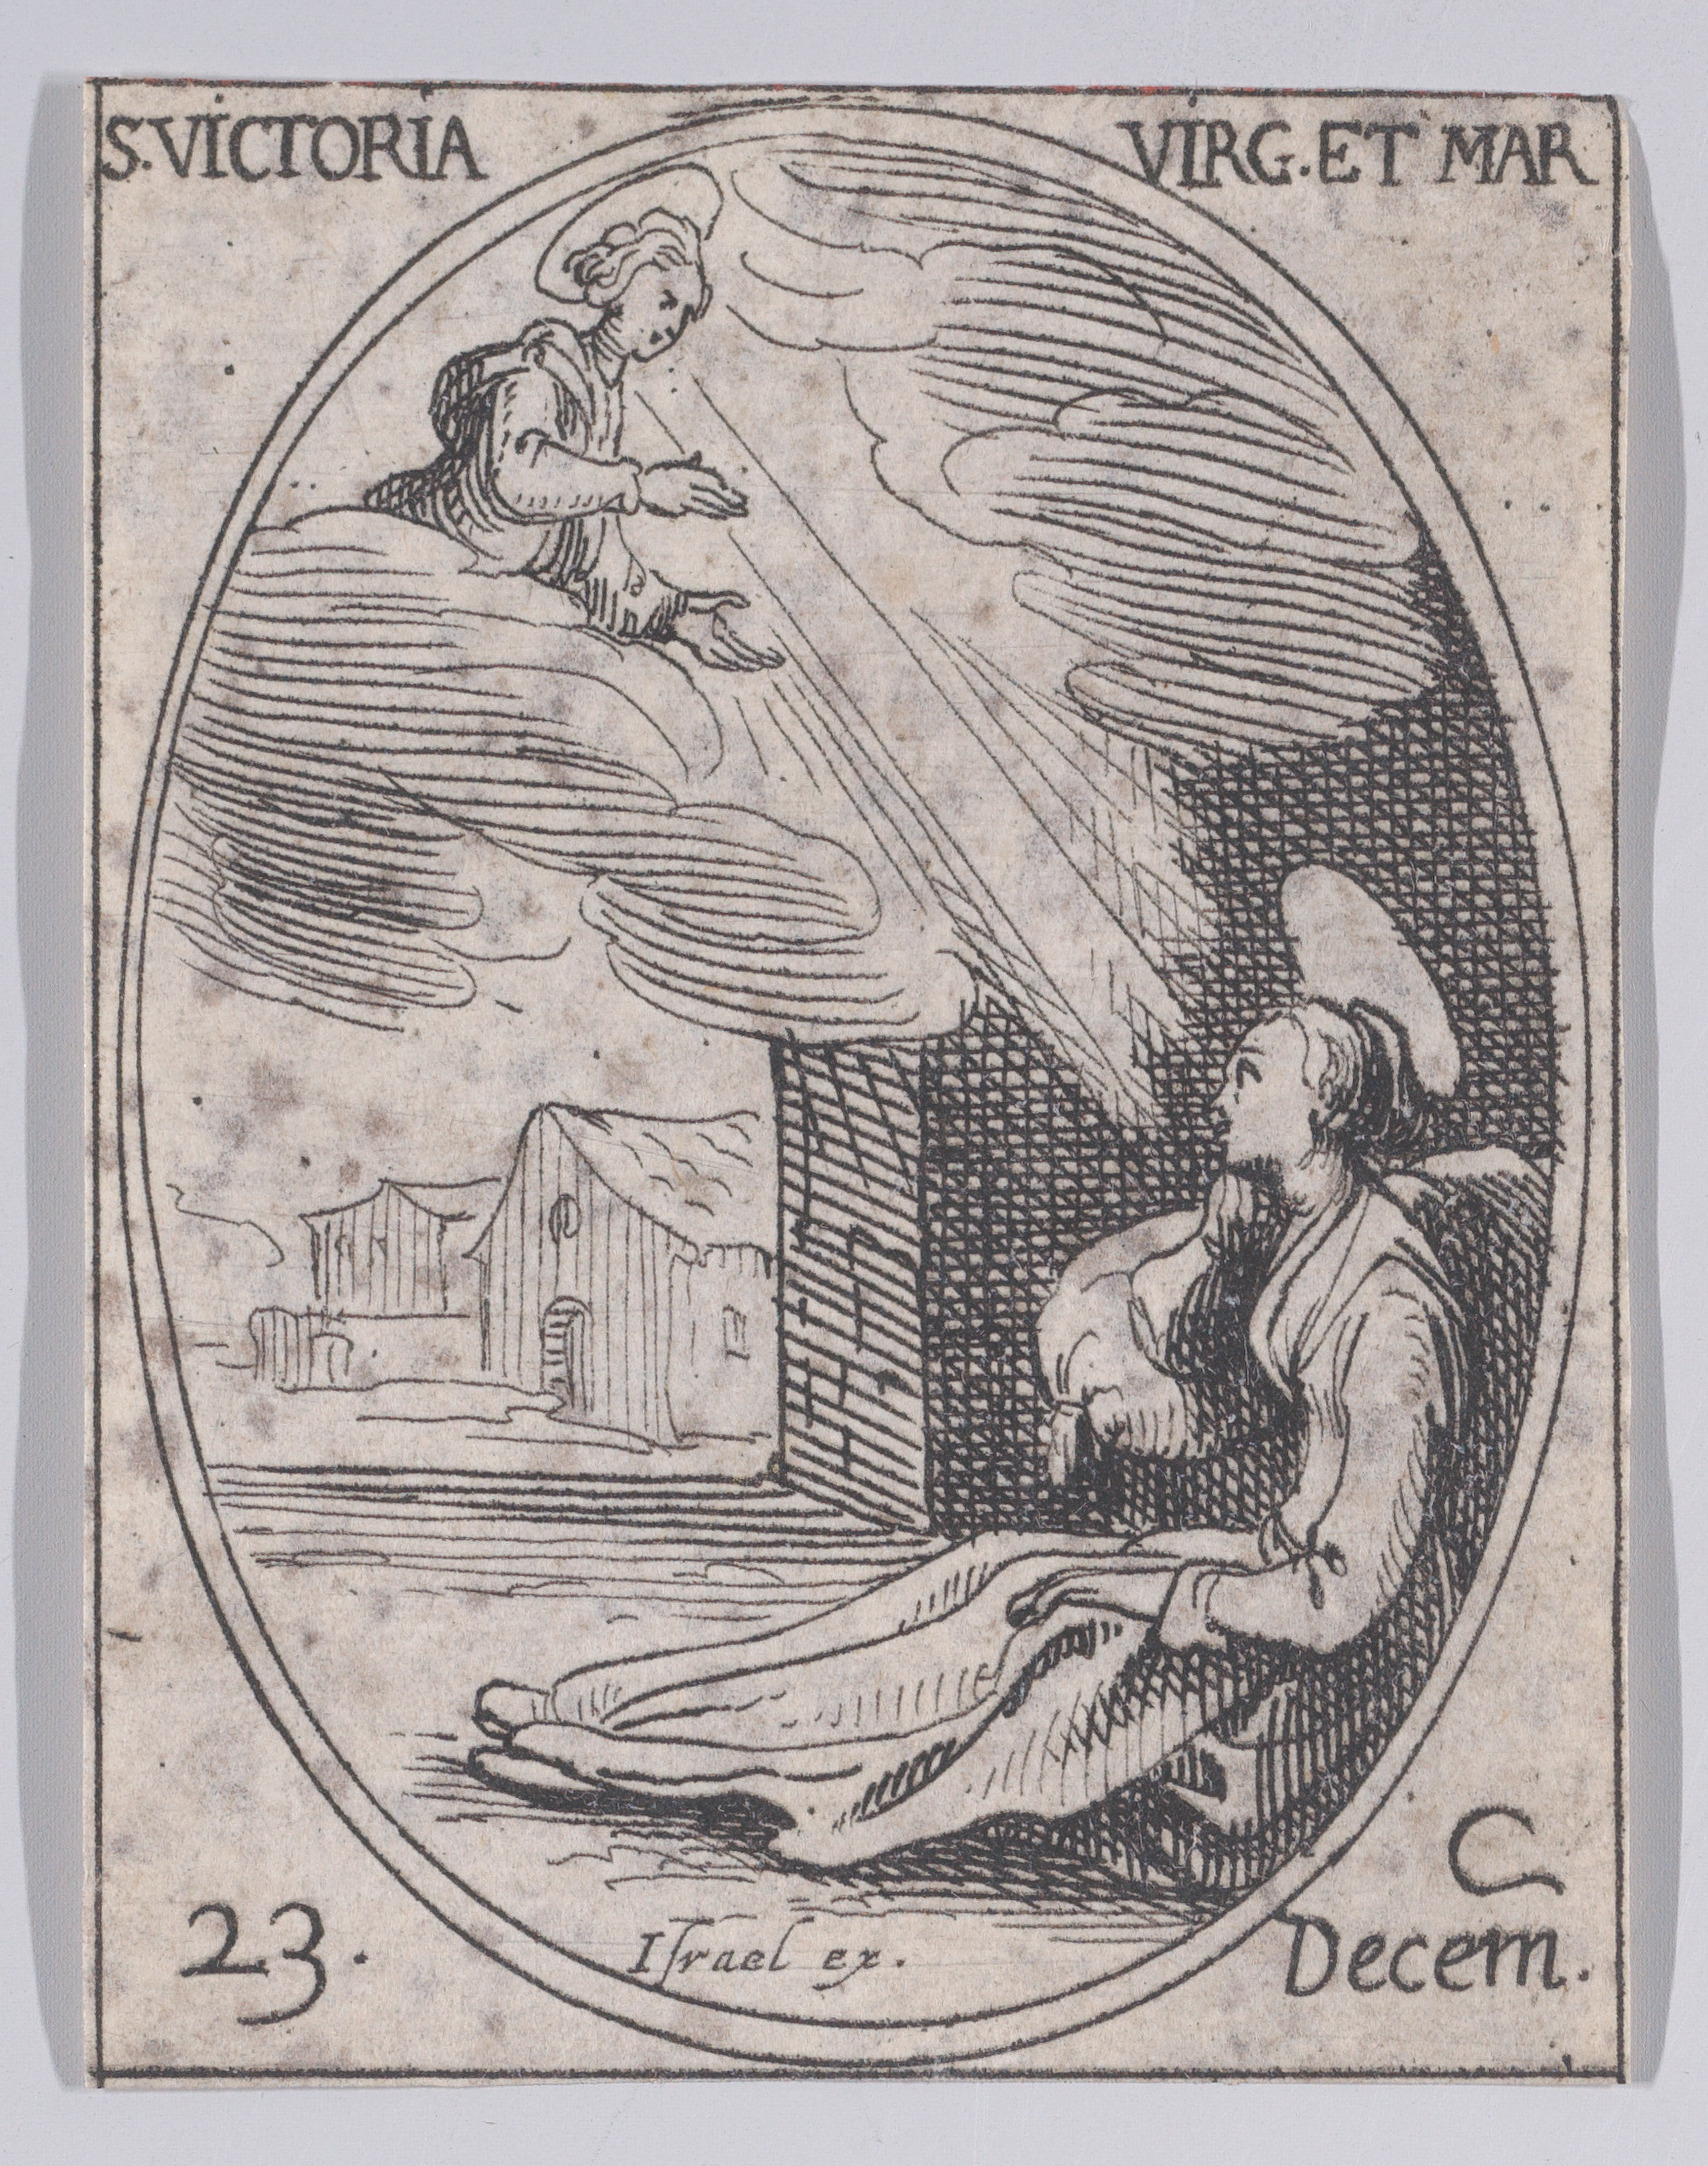 Ste. Victoire, vierge et martyre (St. Victoria, Virgin and Martyr), December 23rd, from Les Images De Tous Les Saincts et Saintes de L'Année (Images of All of the Saints and Religious Events of the Year), Jacques Callot (French, Nancy 1592–1635 Nancy), Etching; second state of two (Lieure)